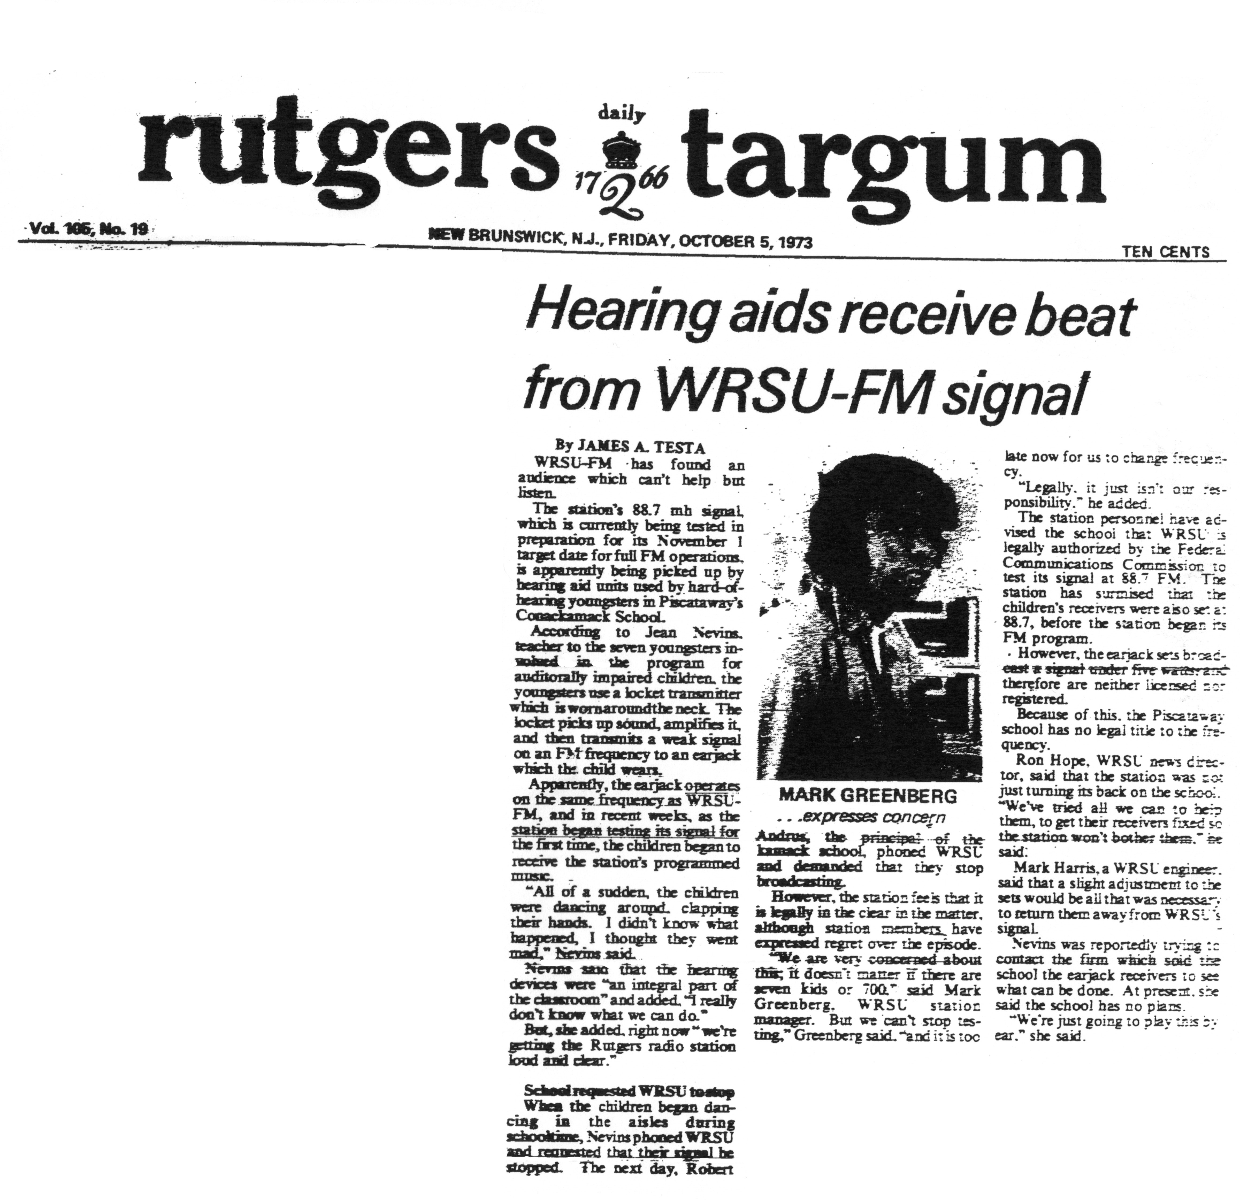 1973 - One of the many stories getting FM running - Interference was a major problem back then